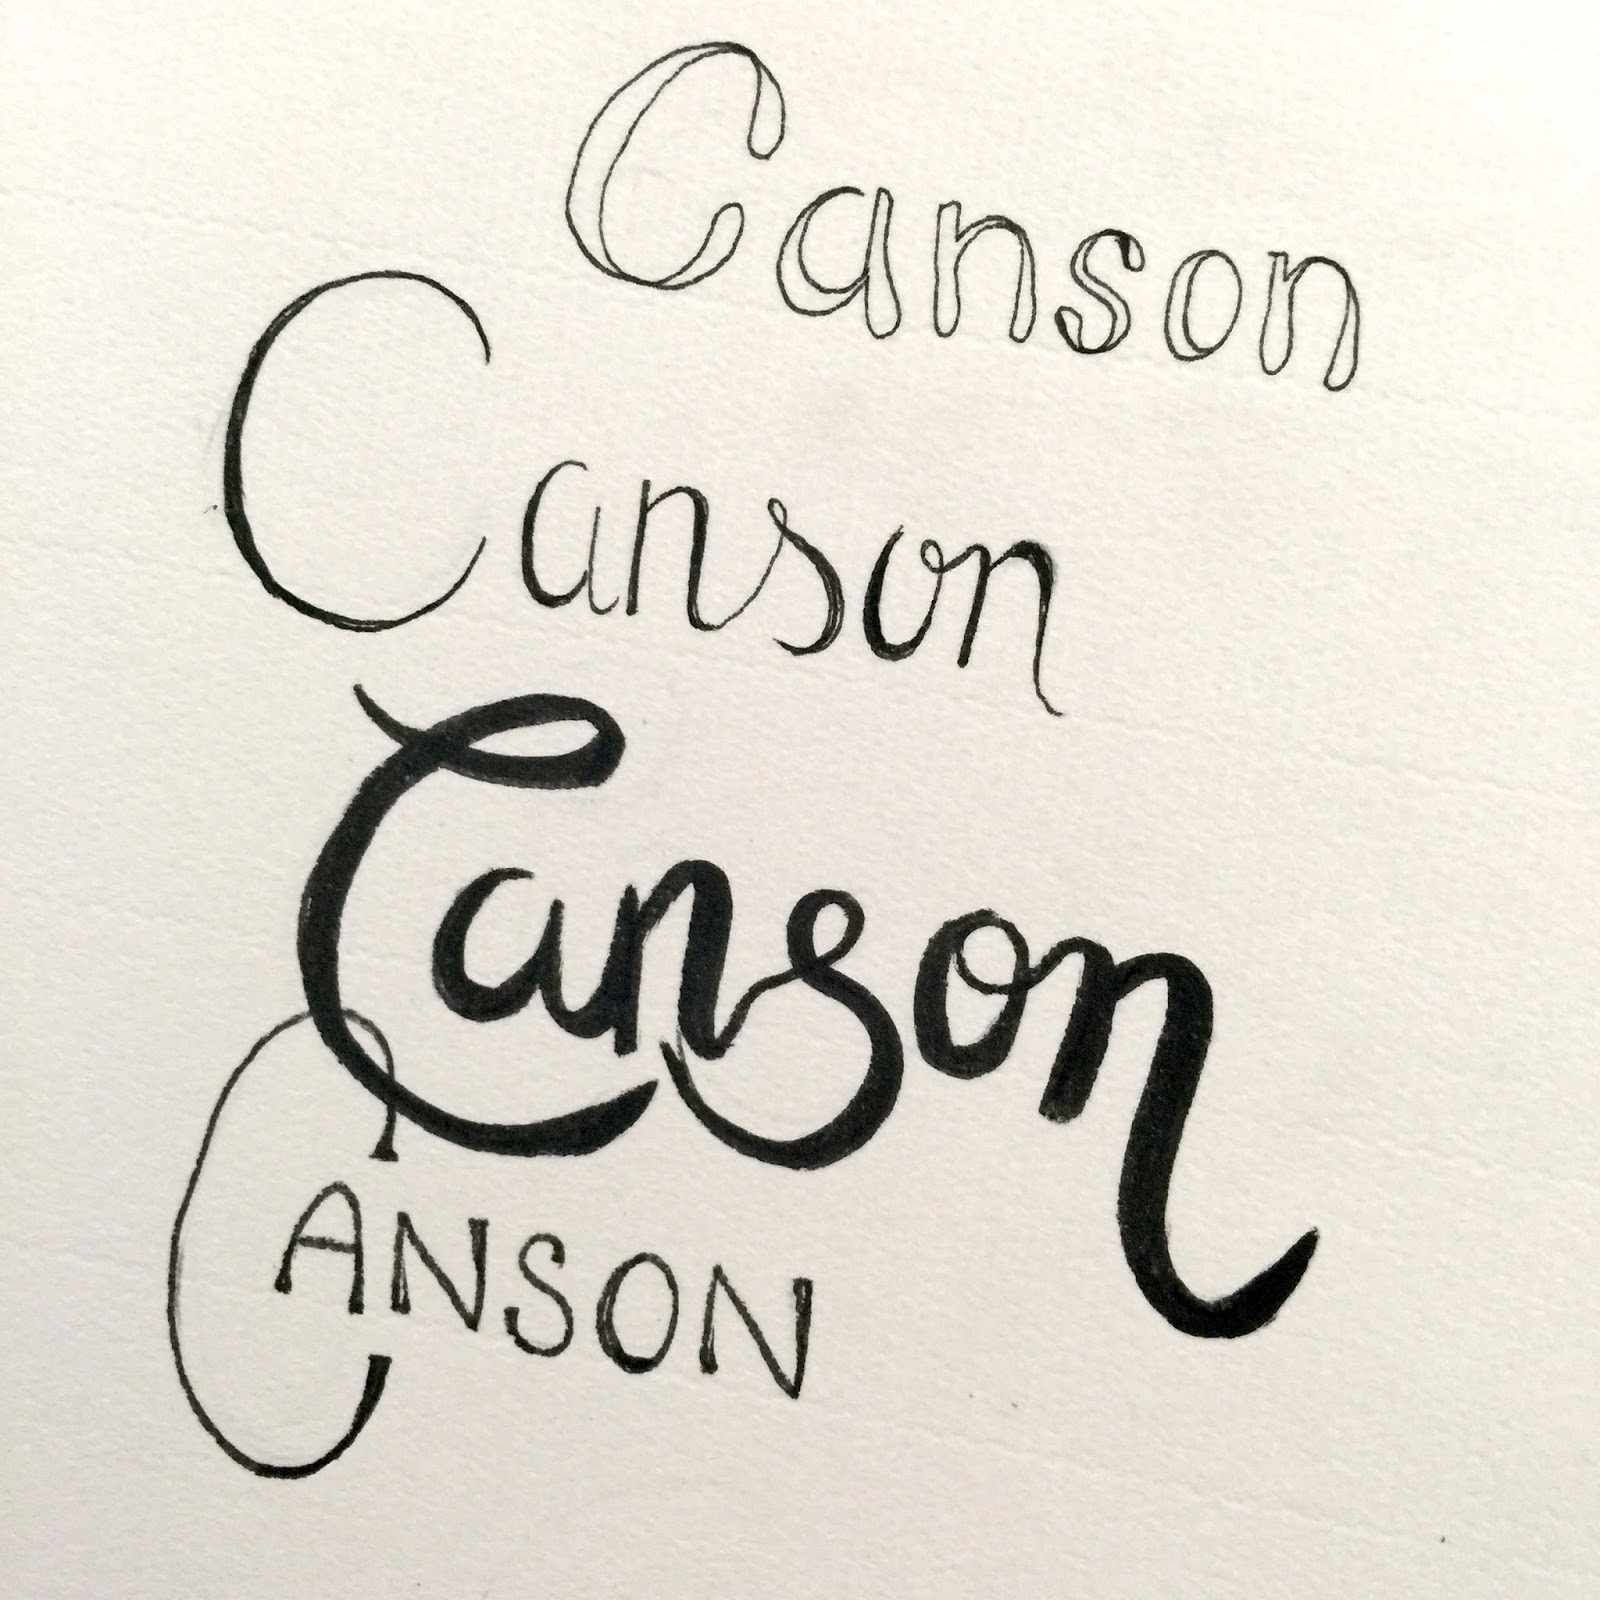 Canson Sketchbook, White